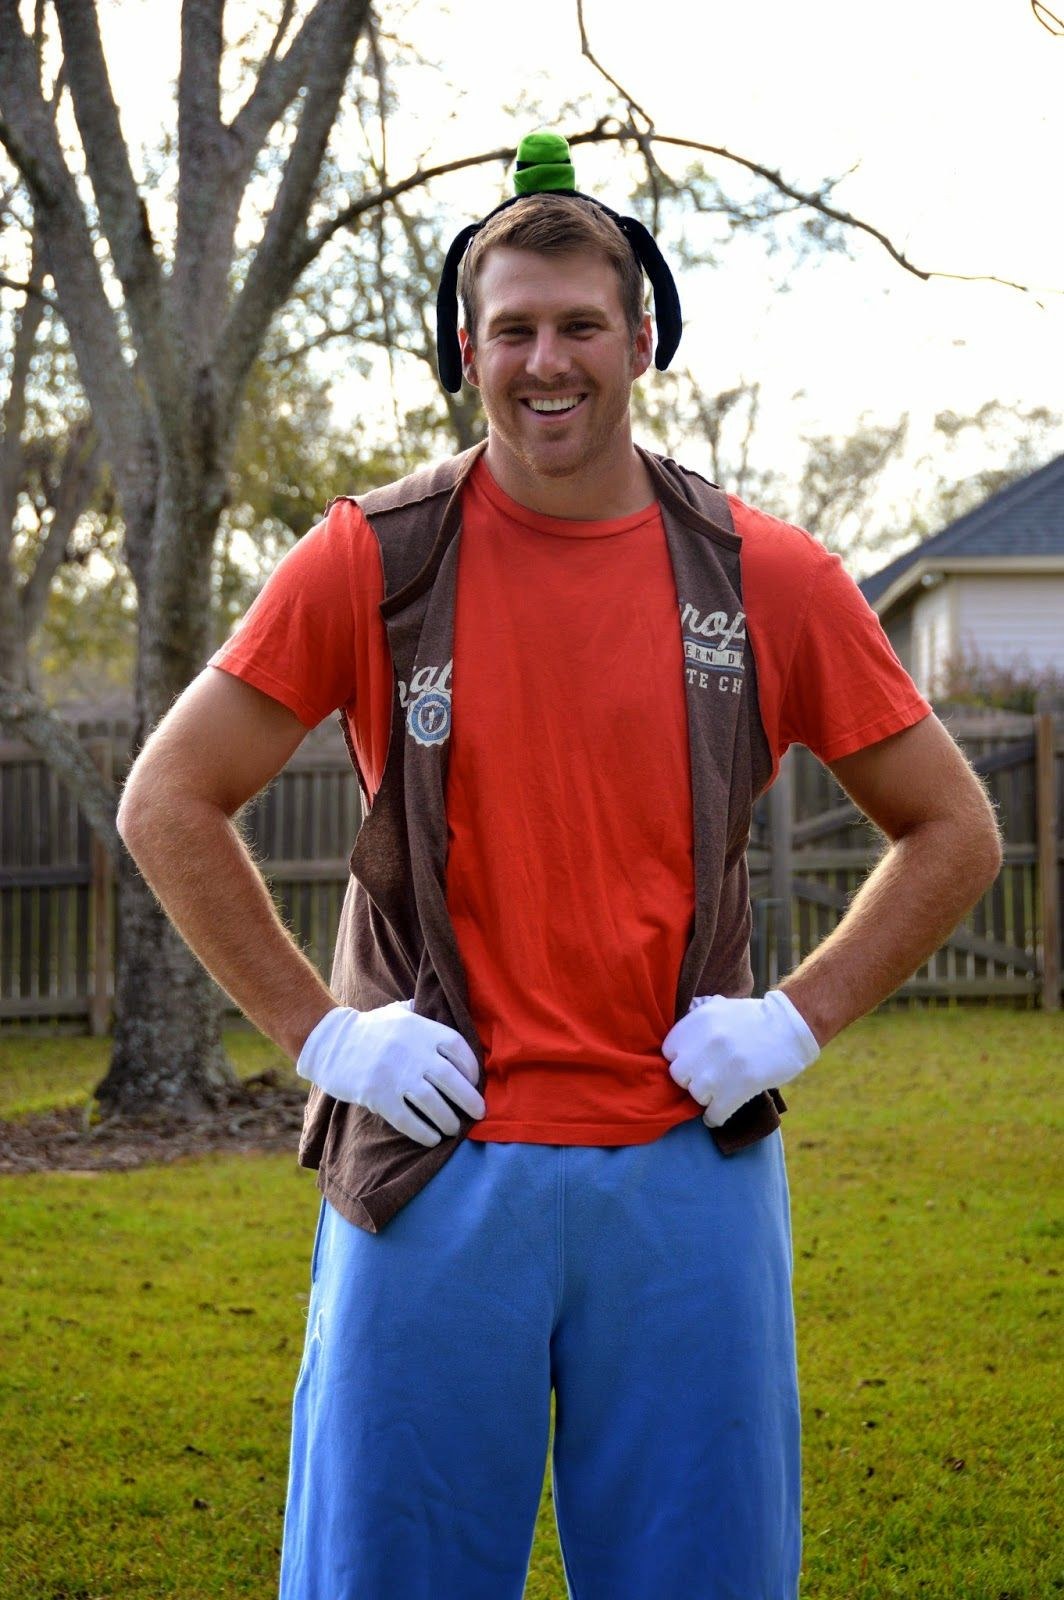 DIY Goofy Costume
 The Fab Five Holiday